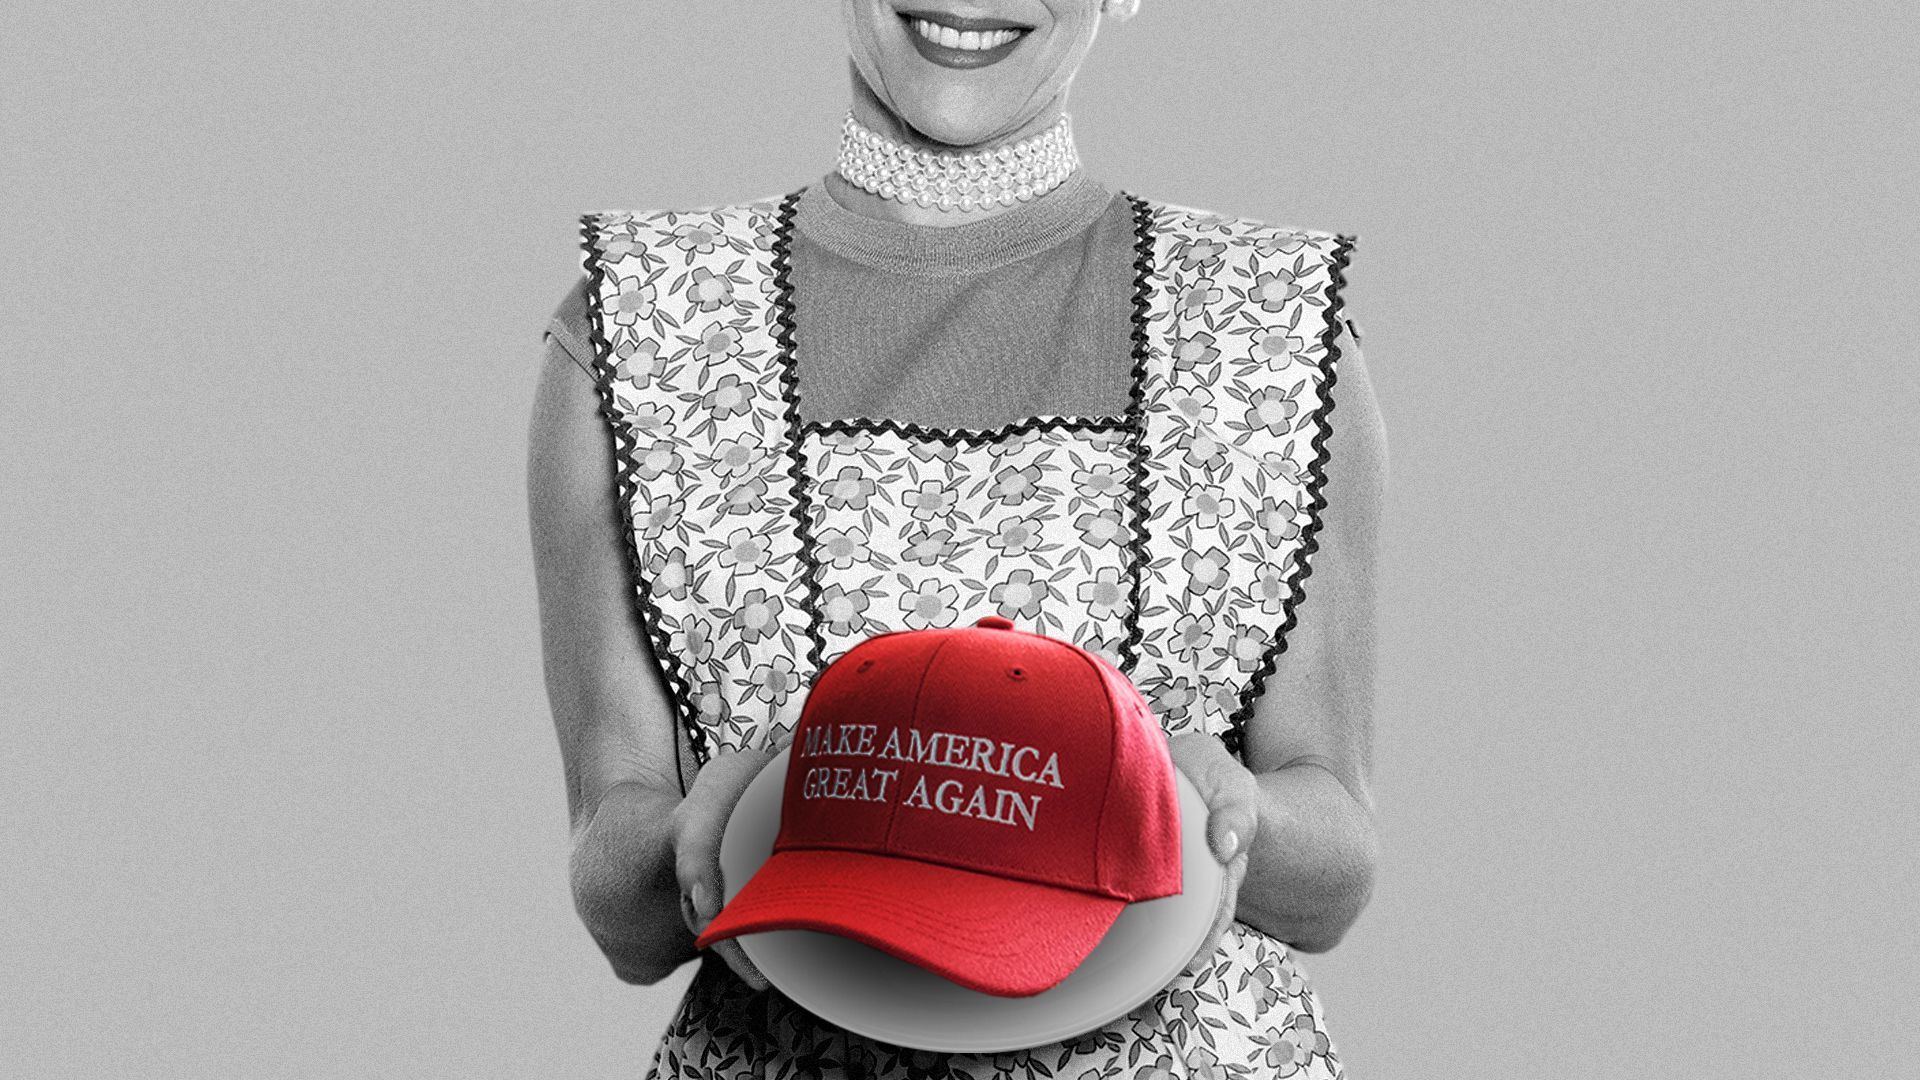 Photo illustration of a 1950's housewife serving a MAGA hat on a plate.